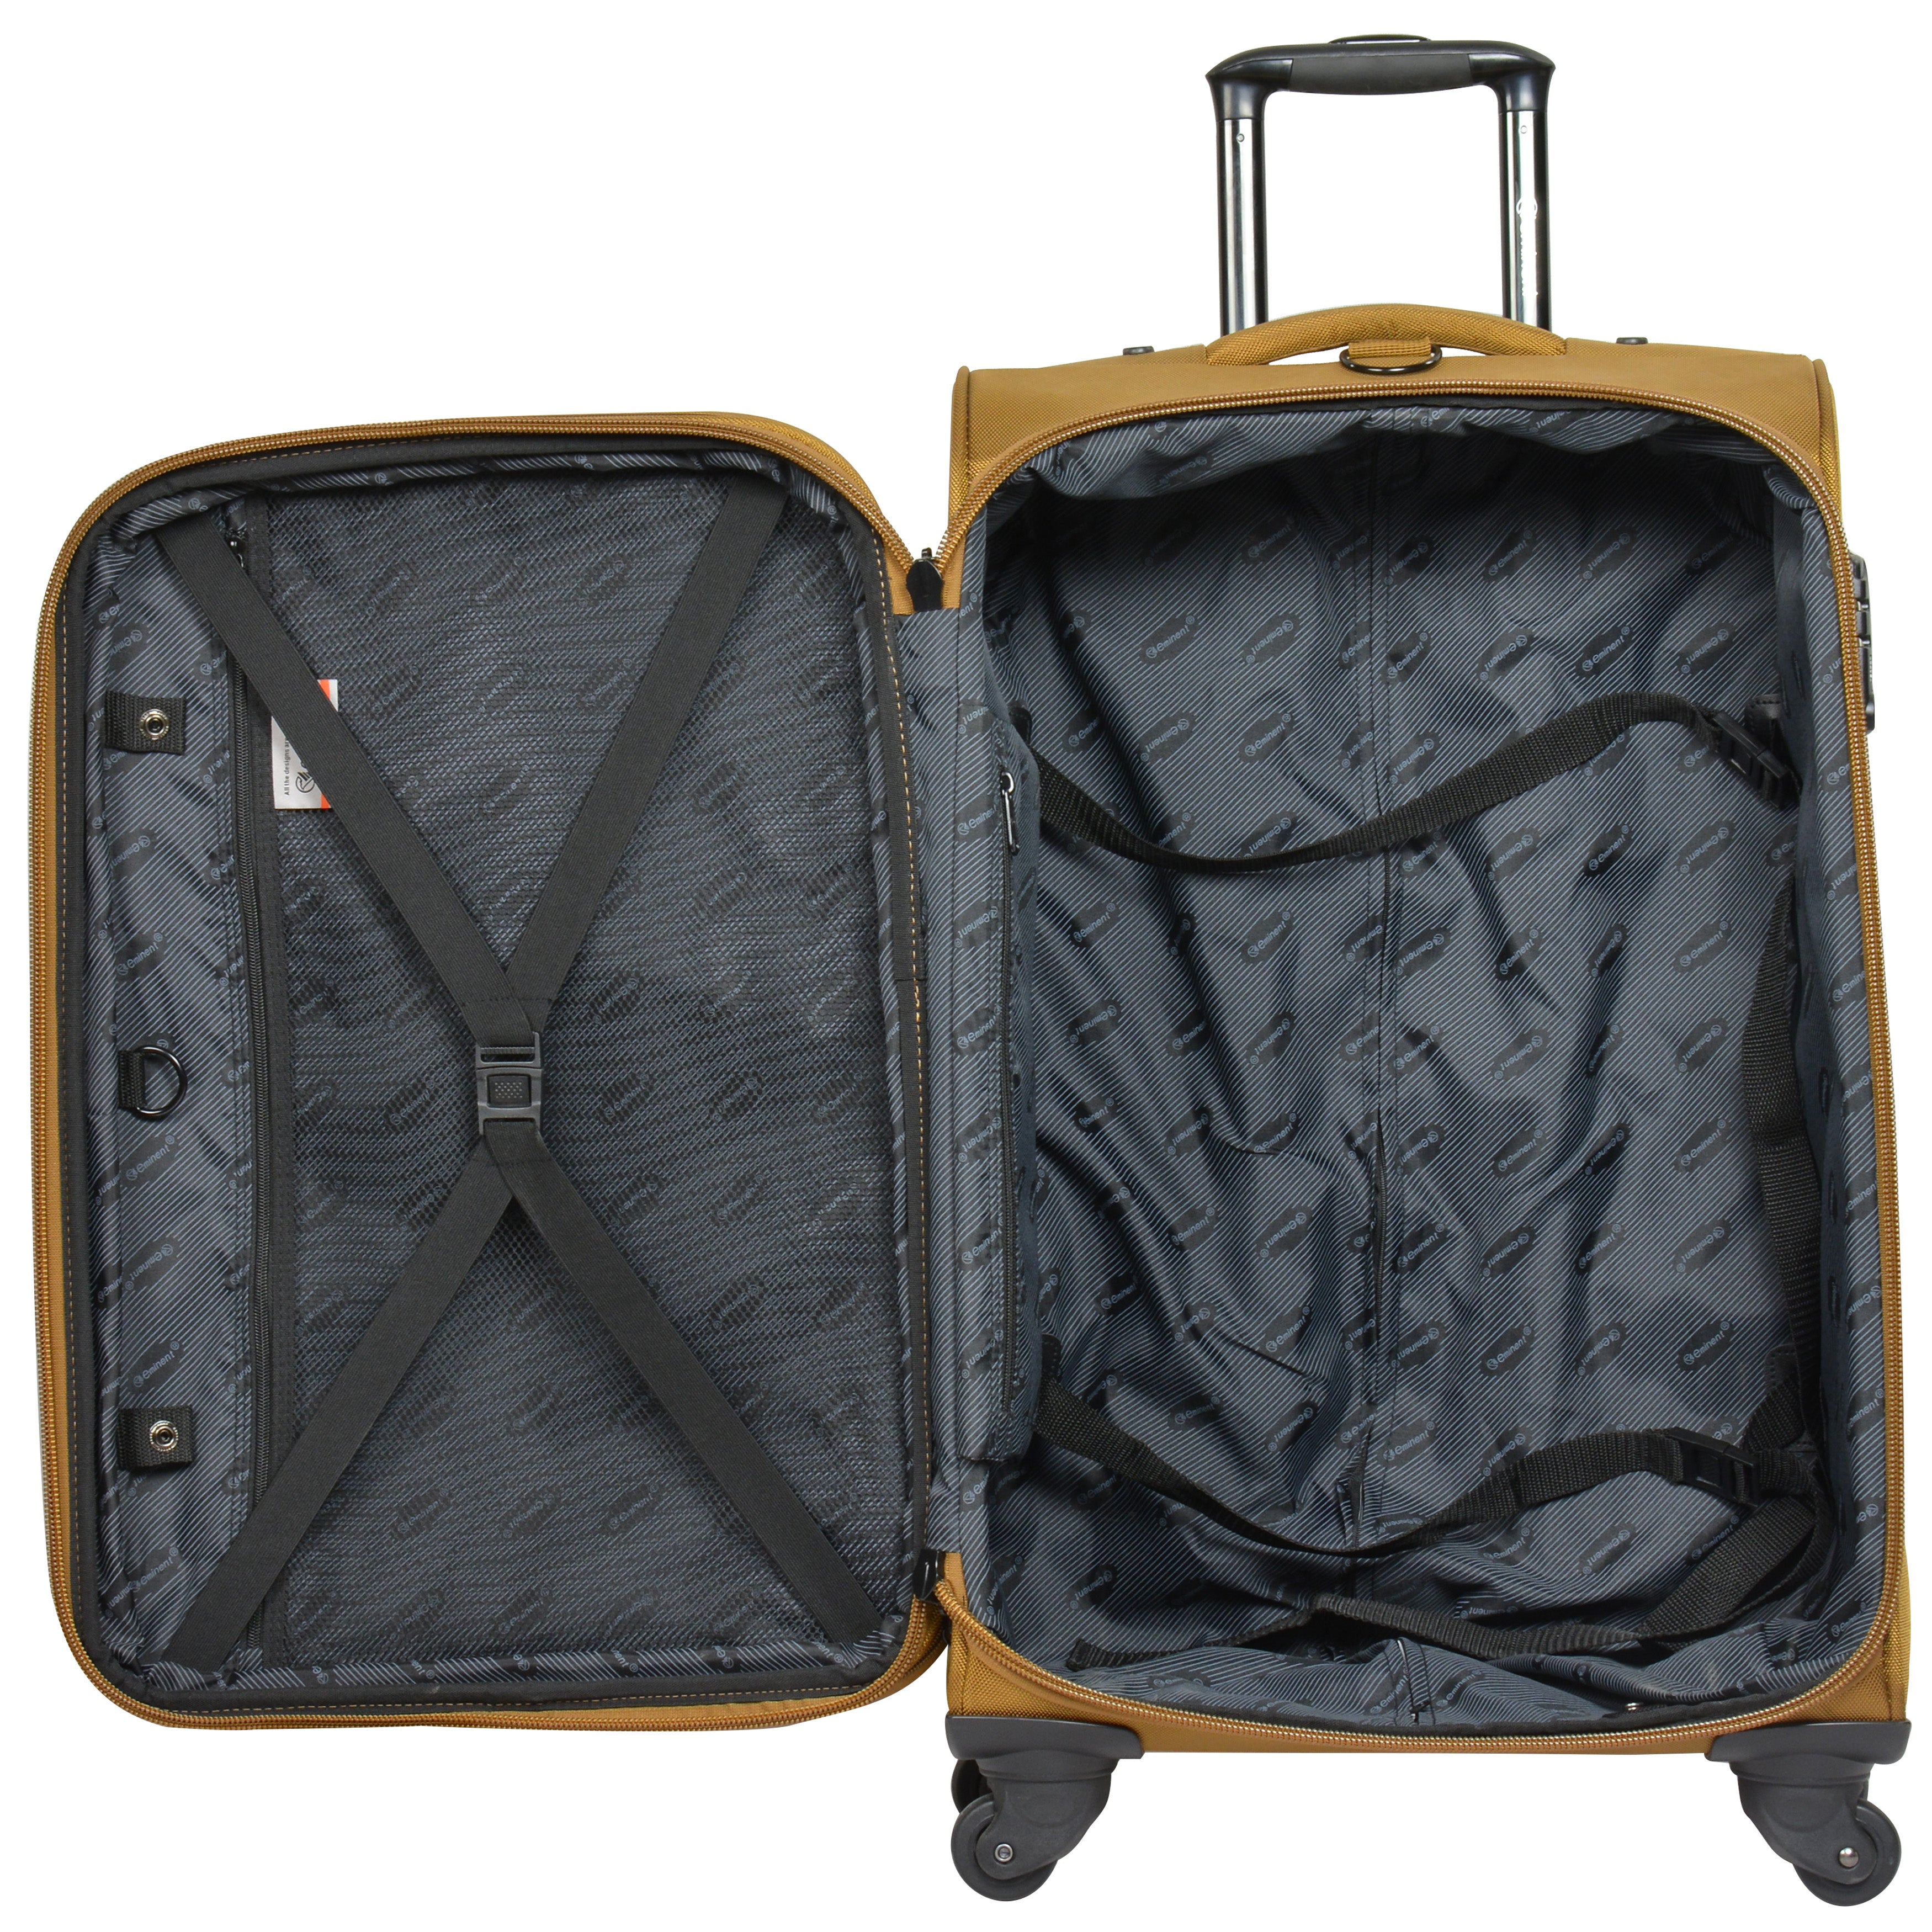 Eminent luggage checked baggage size Soft Trolley bag (V481A-29) - buyluggageonline